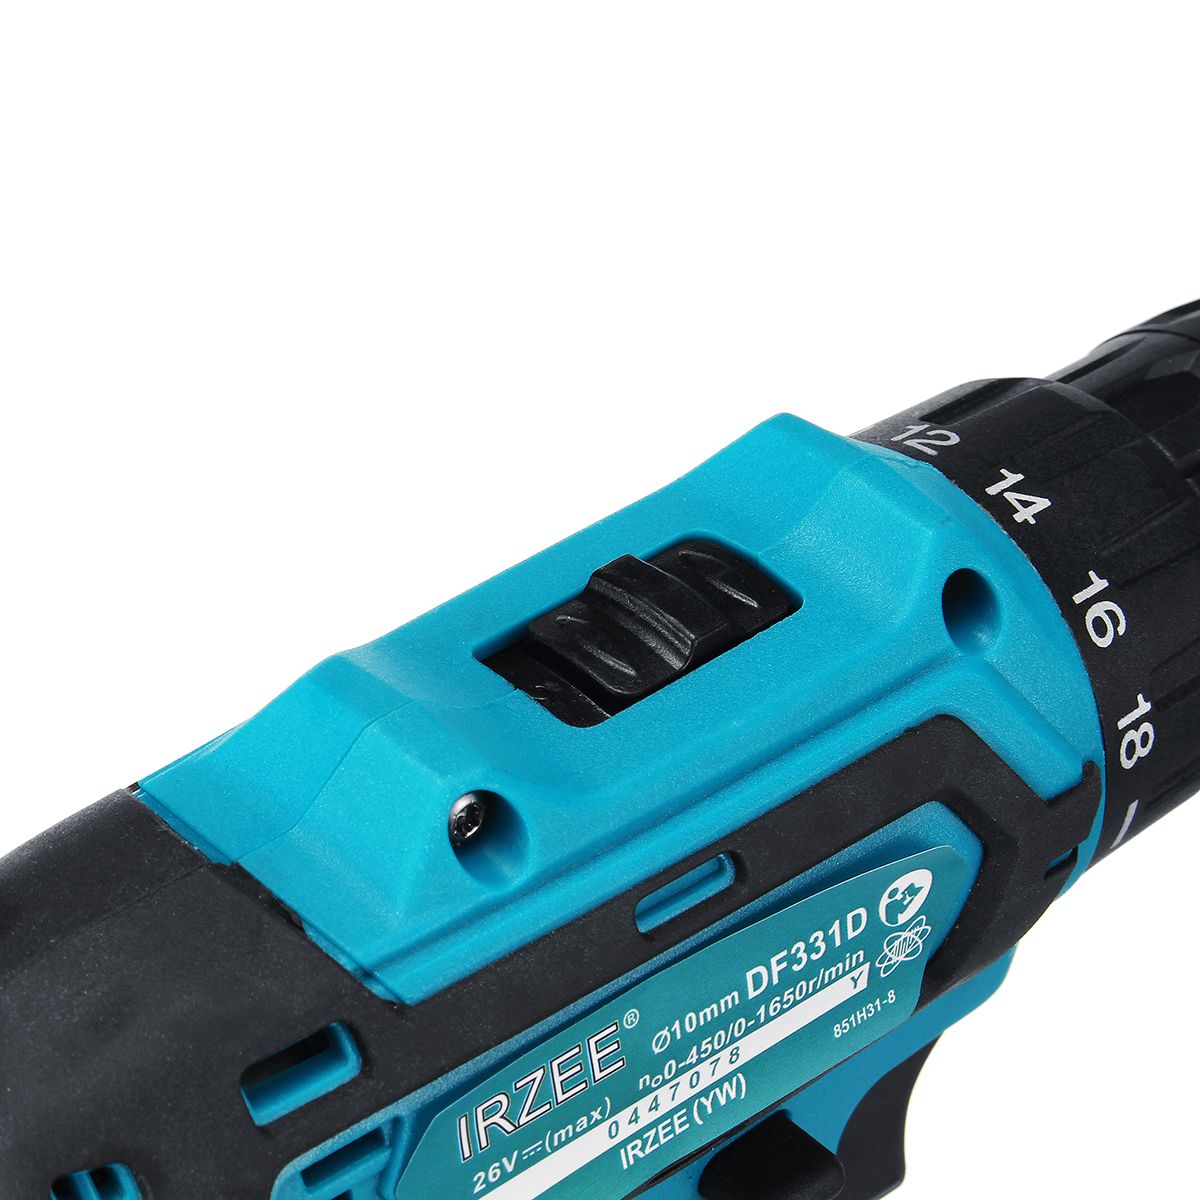 26V-Electric-Cordless-Drill-Power-Drills-253-Stage-Lithium-Battery-Drilling-Tools-With-12-Battery-1460499